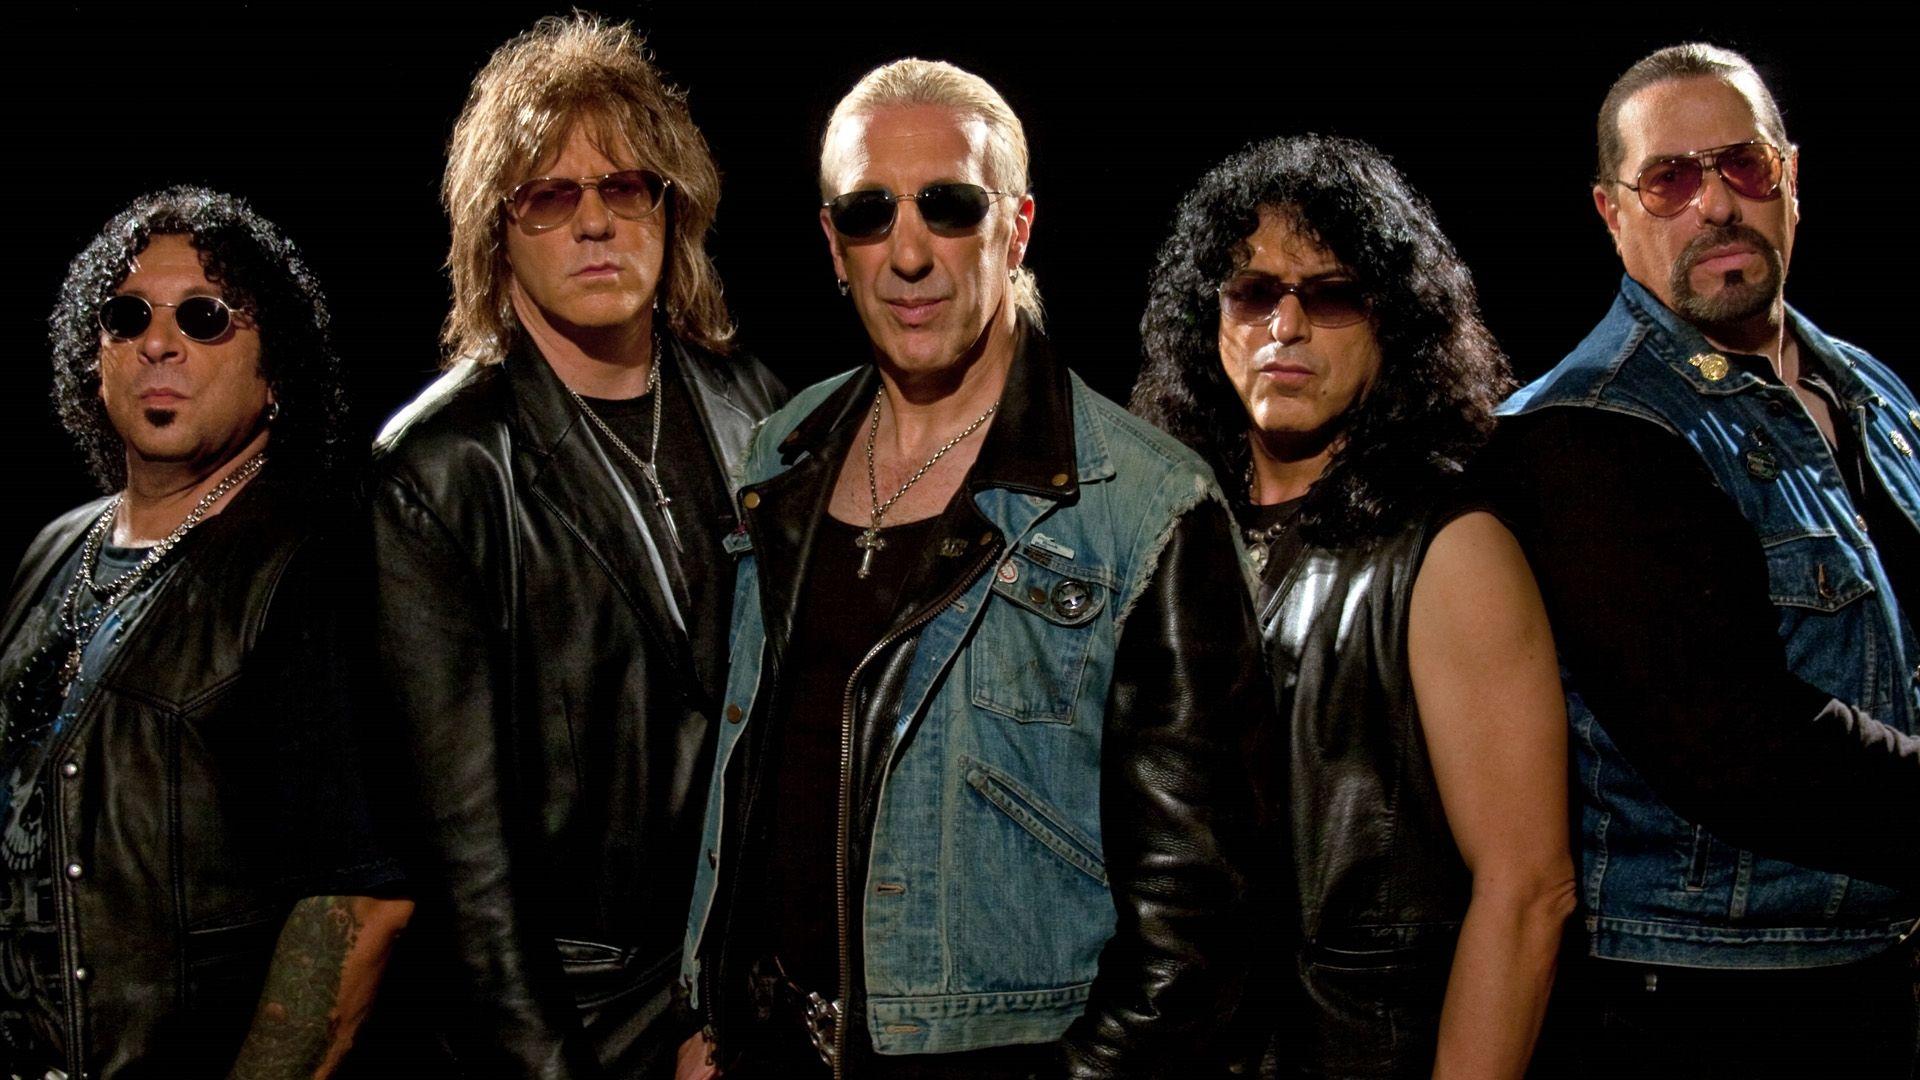 Download Wallpaper 1920x1080 twisted sister, band, rockers, glasses